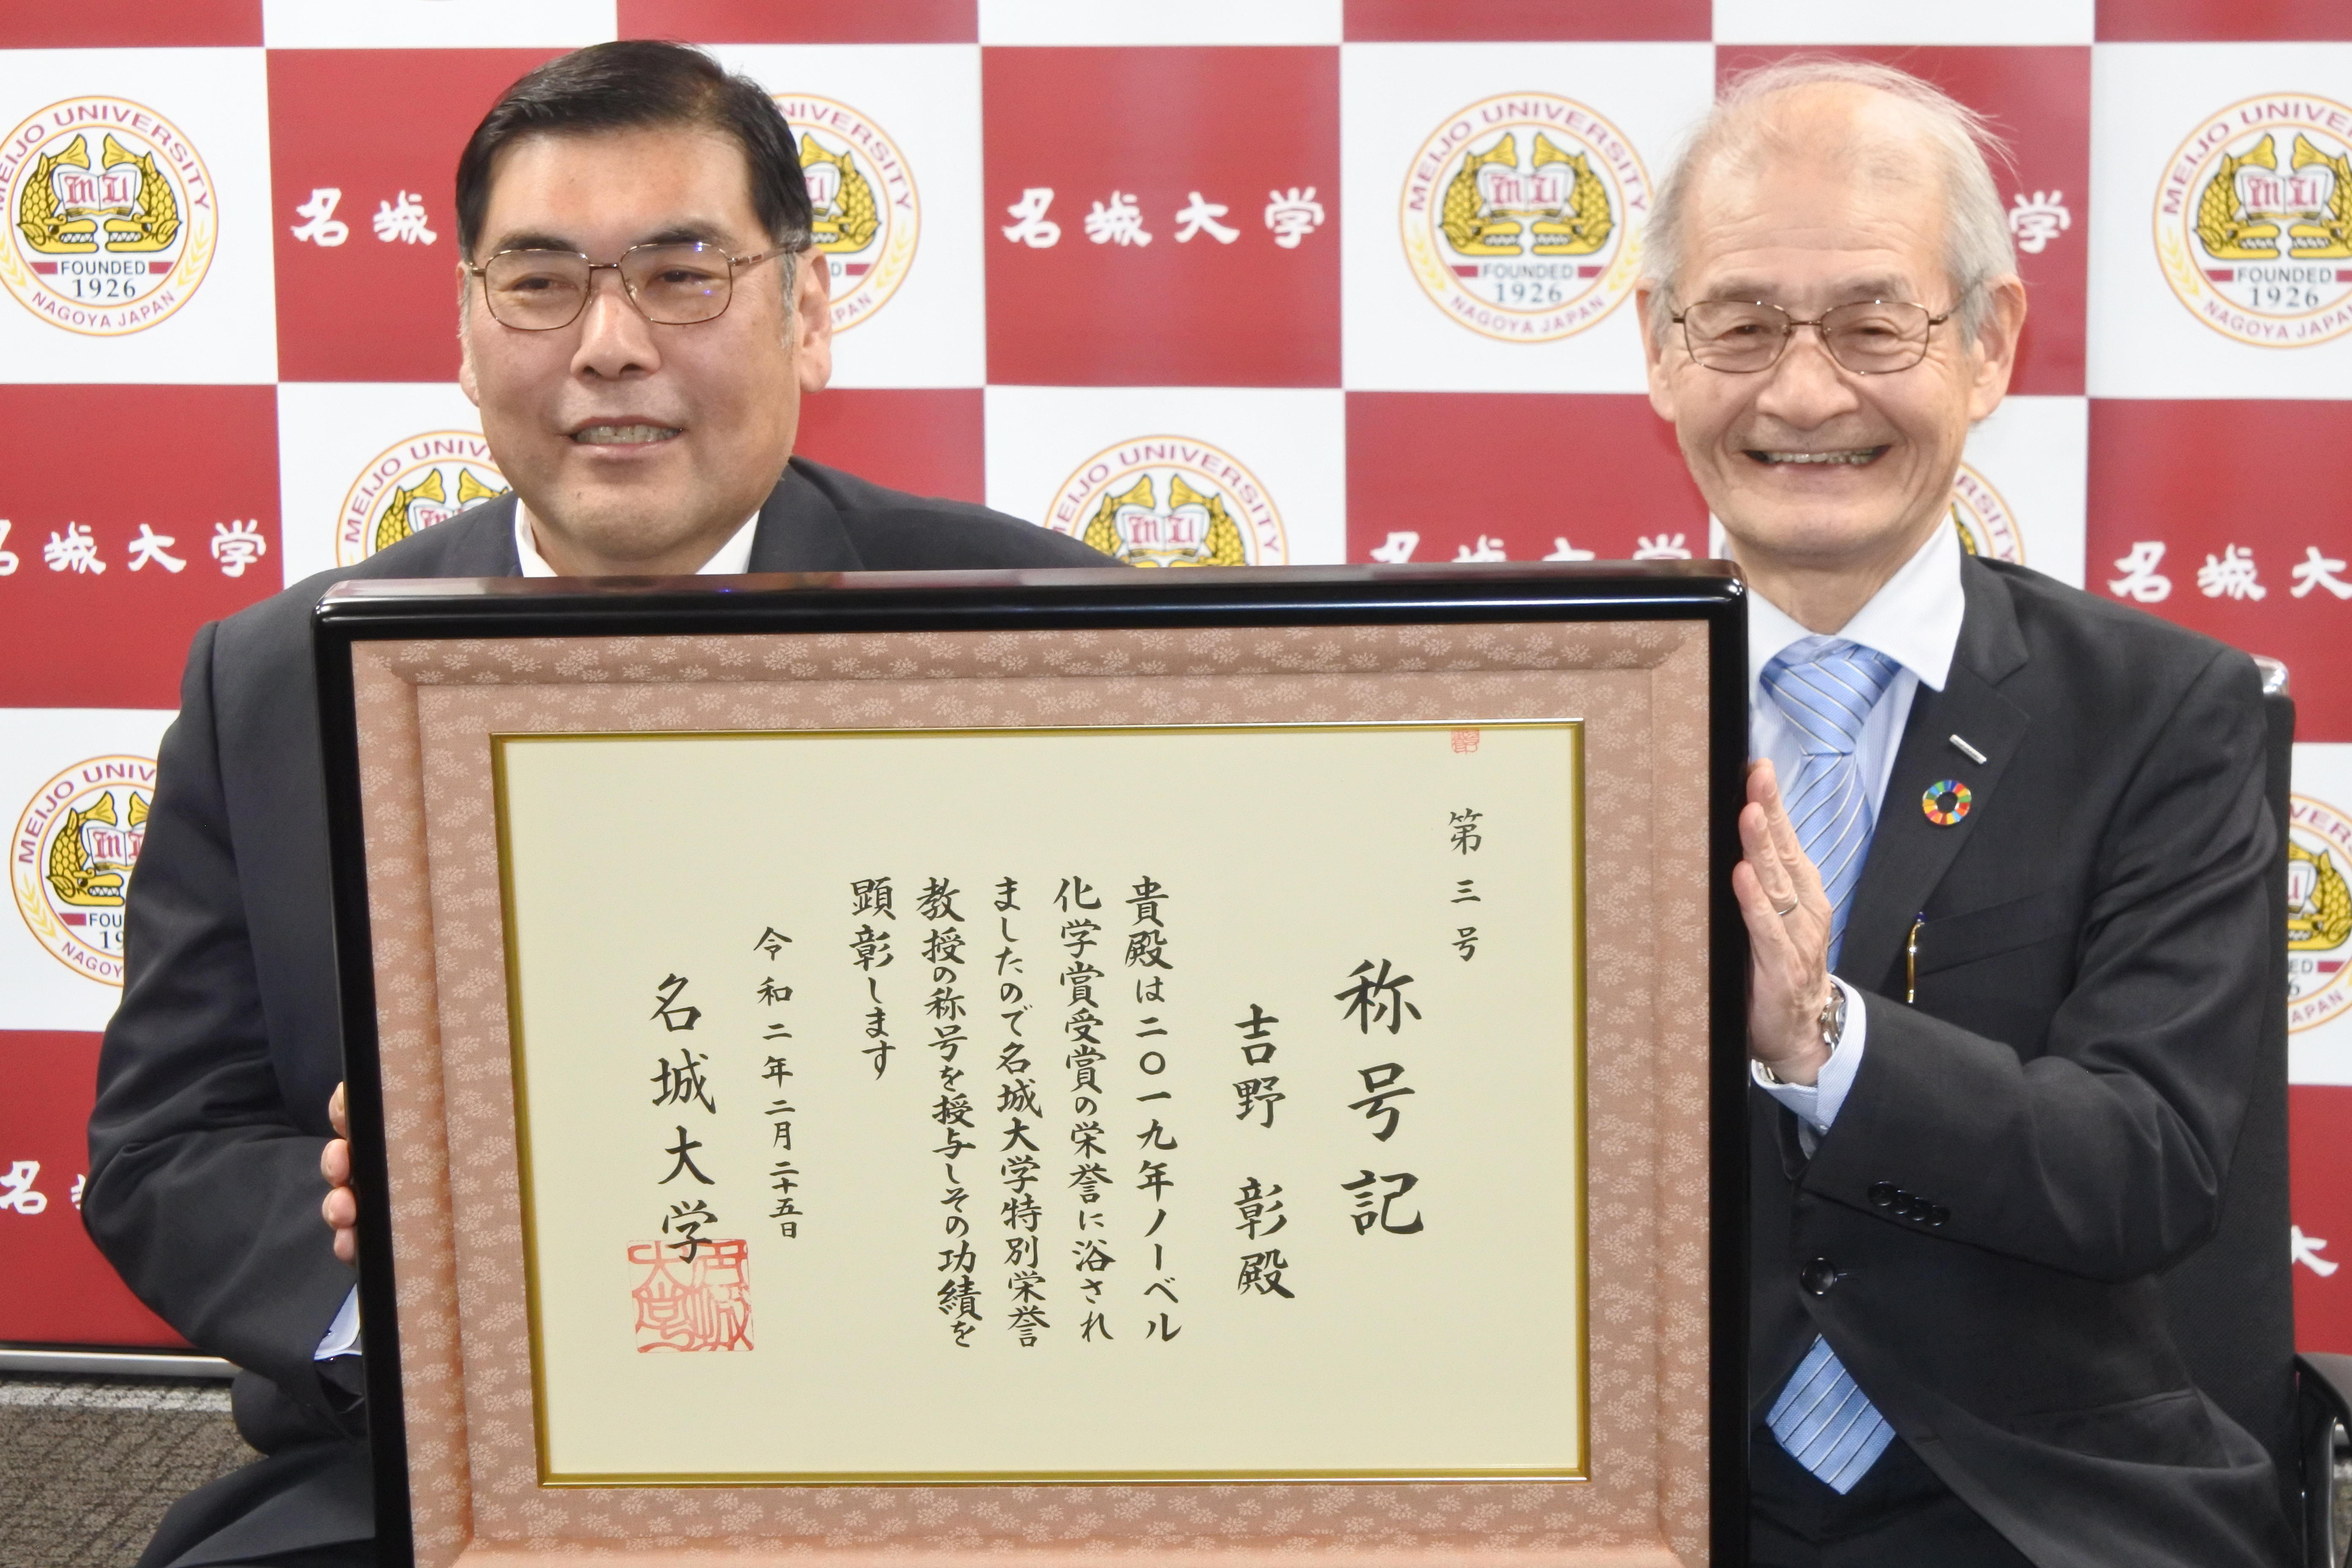 Dr. YOSHINO (right) and President OHARA with the Title Certificate, Distinguished Professor